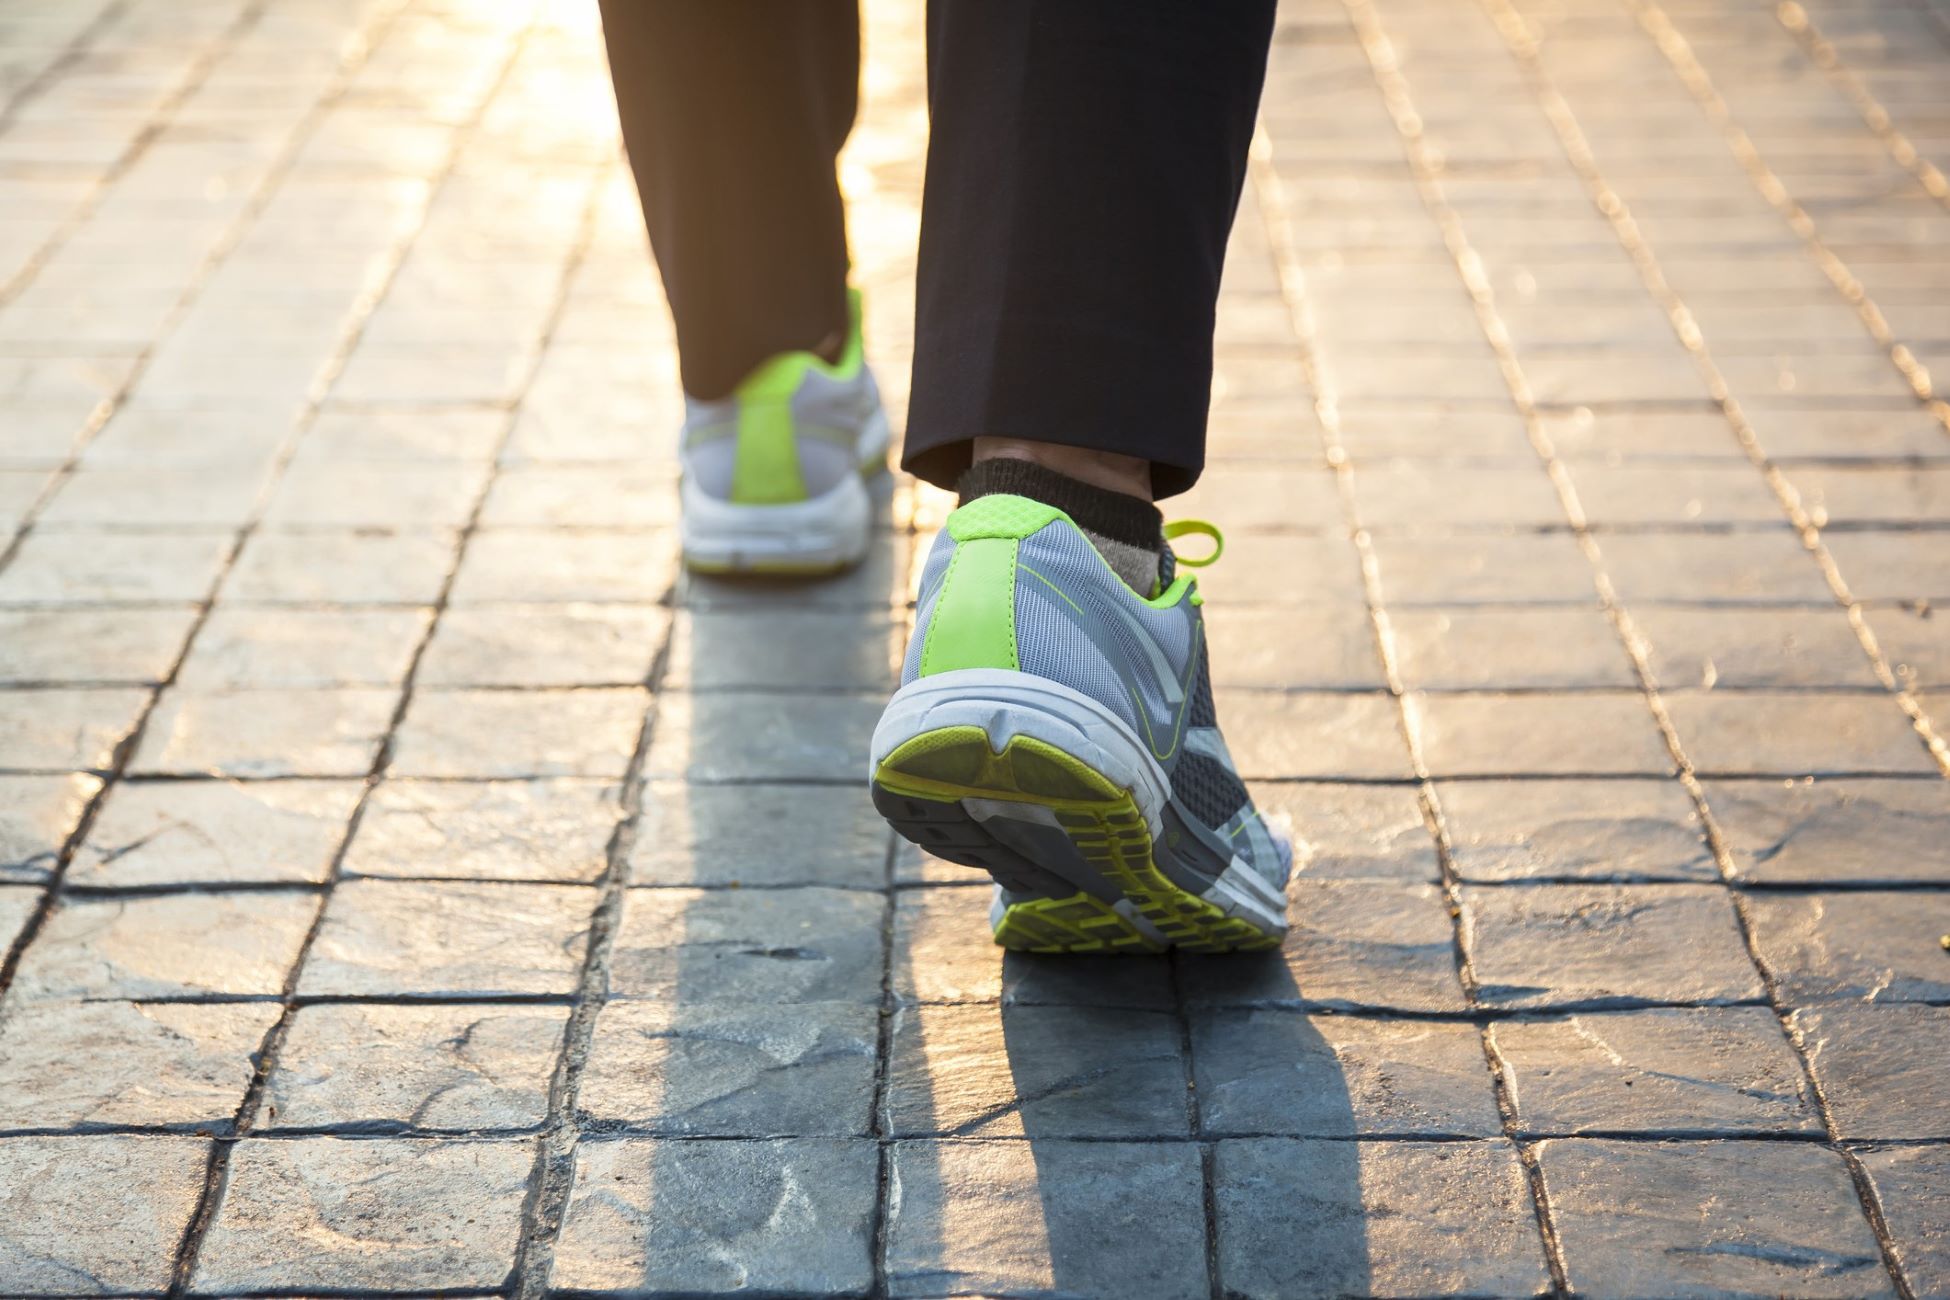 4 Warning Signs For Runners: Common Problems While Walking